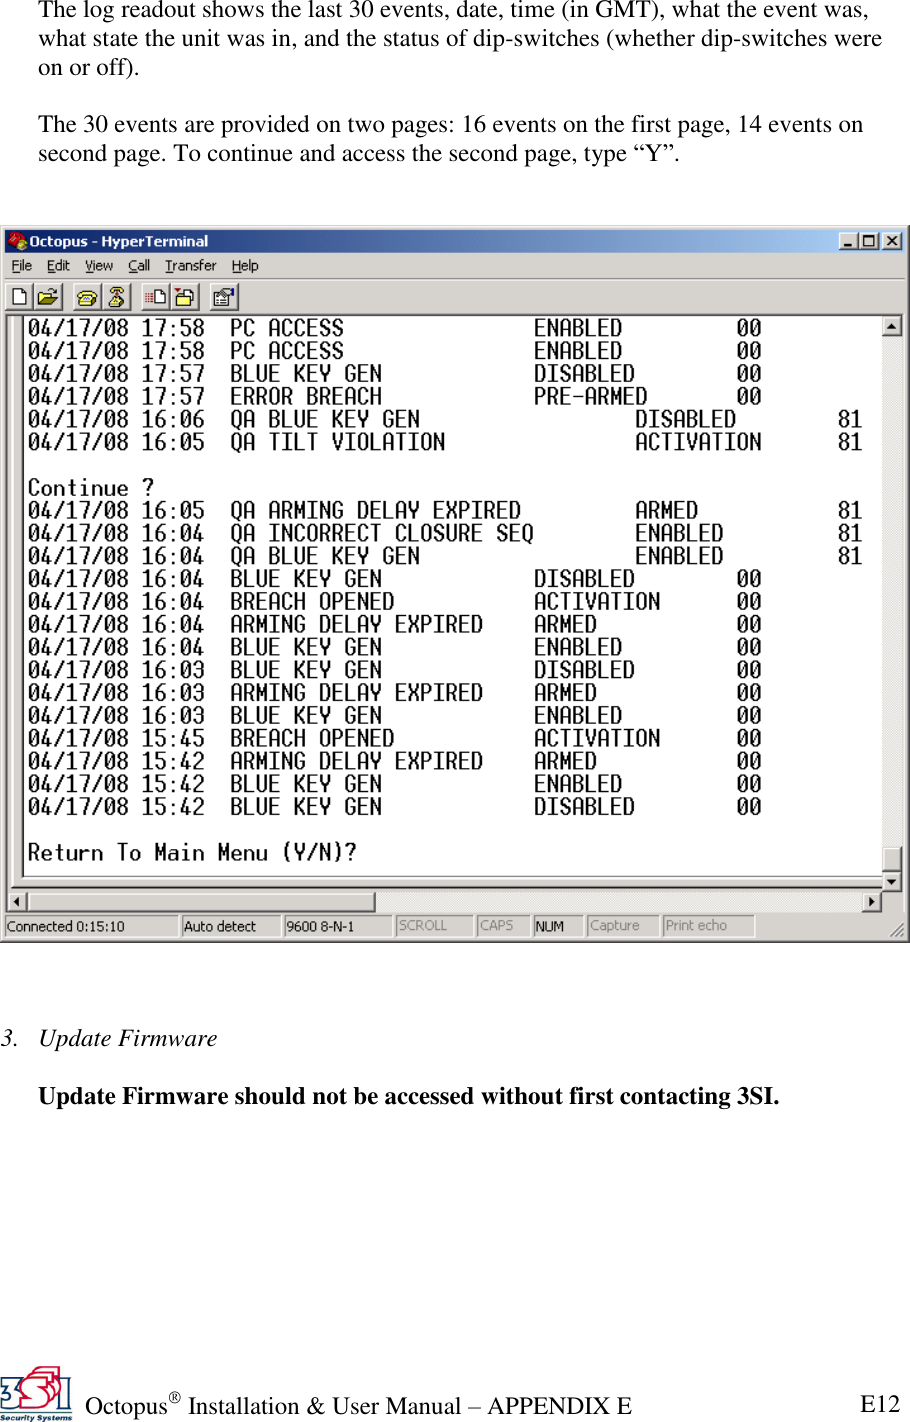   Octopus  Installation &amp; User Manual – APPENDIX E E12 The log readout shows the last 30 events, date, time (in GMT), what the event was, what state the unit was in, and the status of dip-switches (whether dip-switches were on or off).  The 30 events are provided on two pages: 16 events on the first page, 14 events on second page. To continue and access the second page, type ―Y‖.       3. Update Firmware  Update Firmware should not be accessed without first contacting 3SI. 